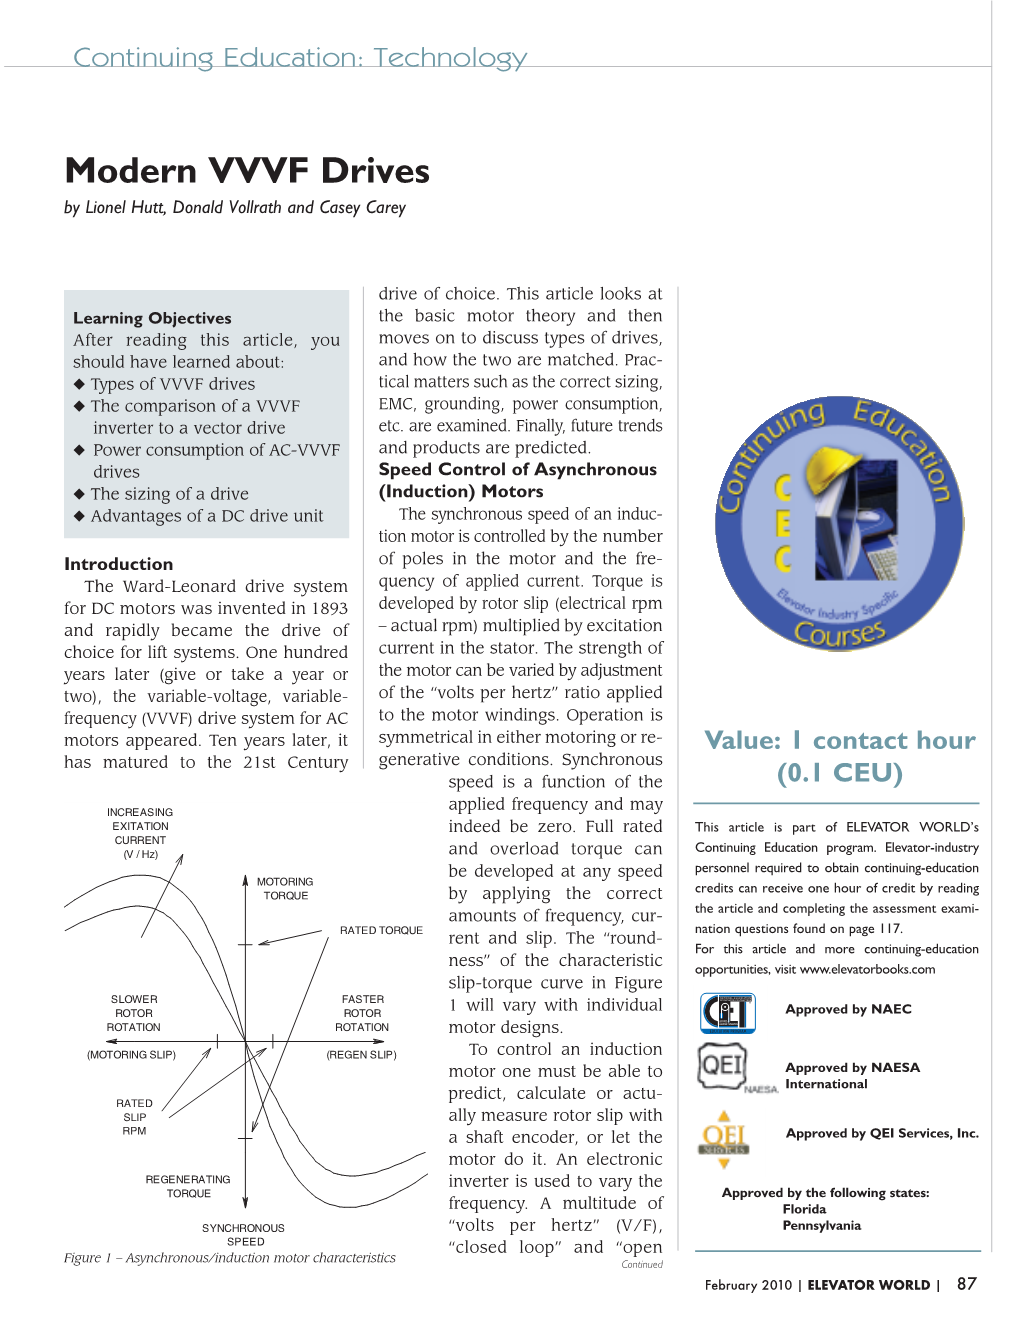 Modern VVVF Drives by Lionel Hutt, Donald Vollrath and Casey Carey